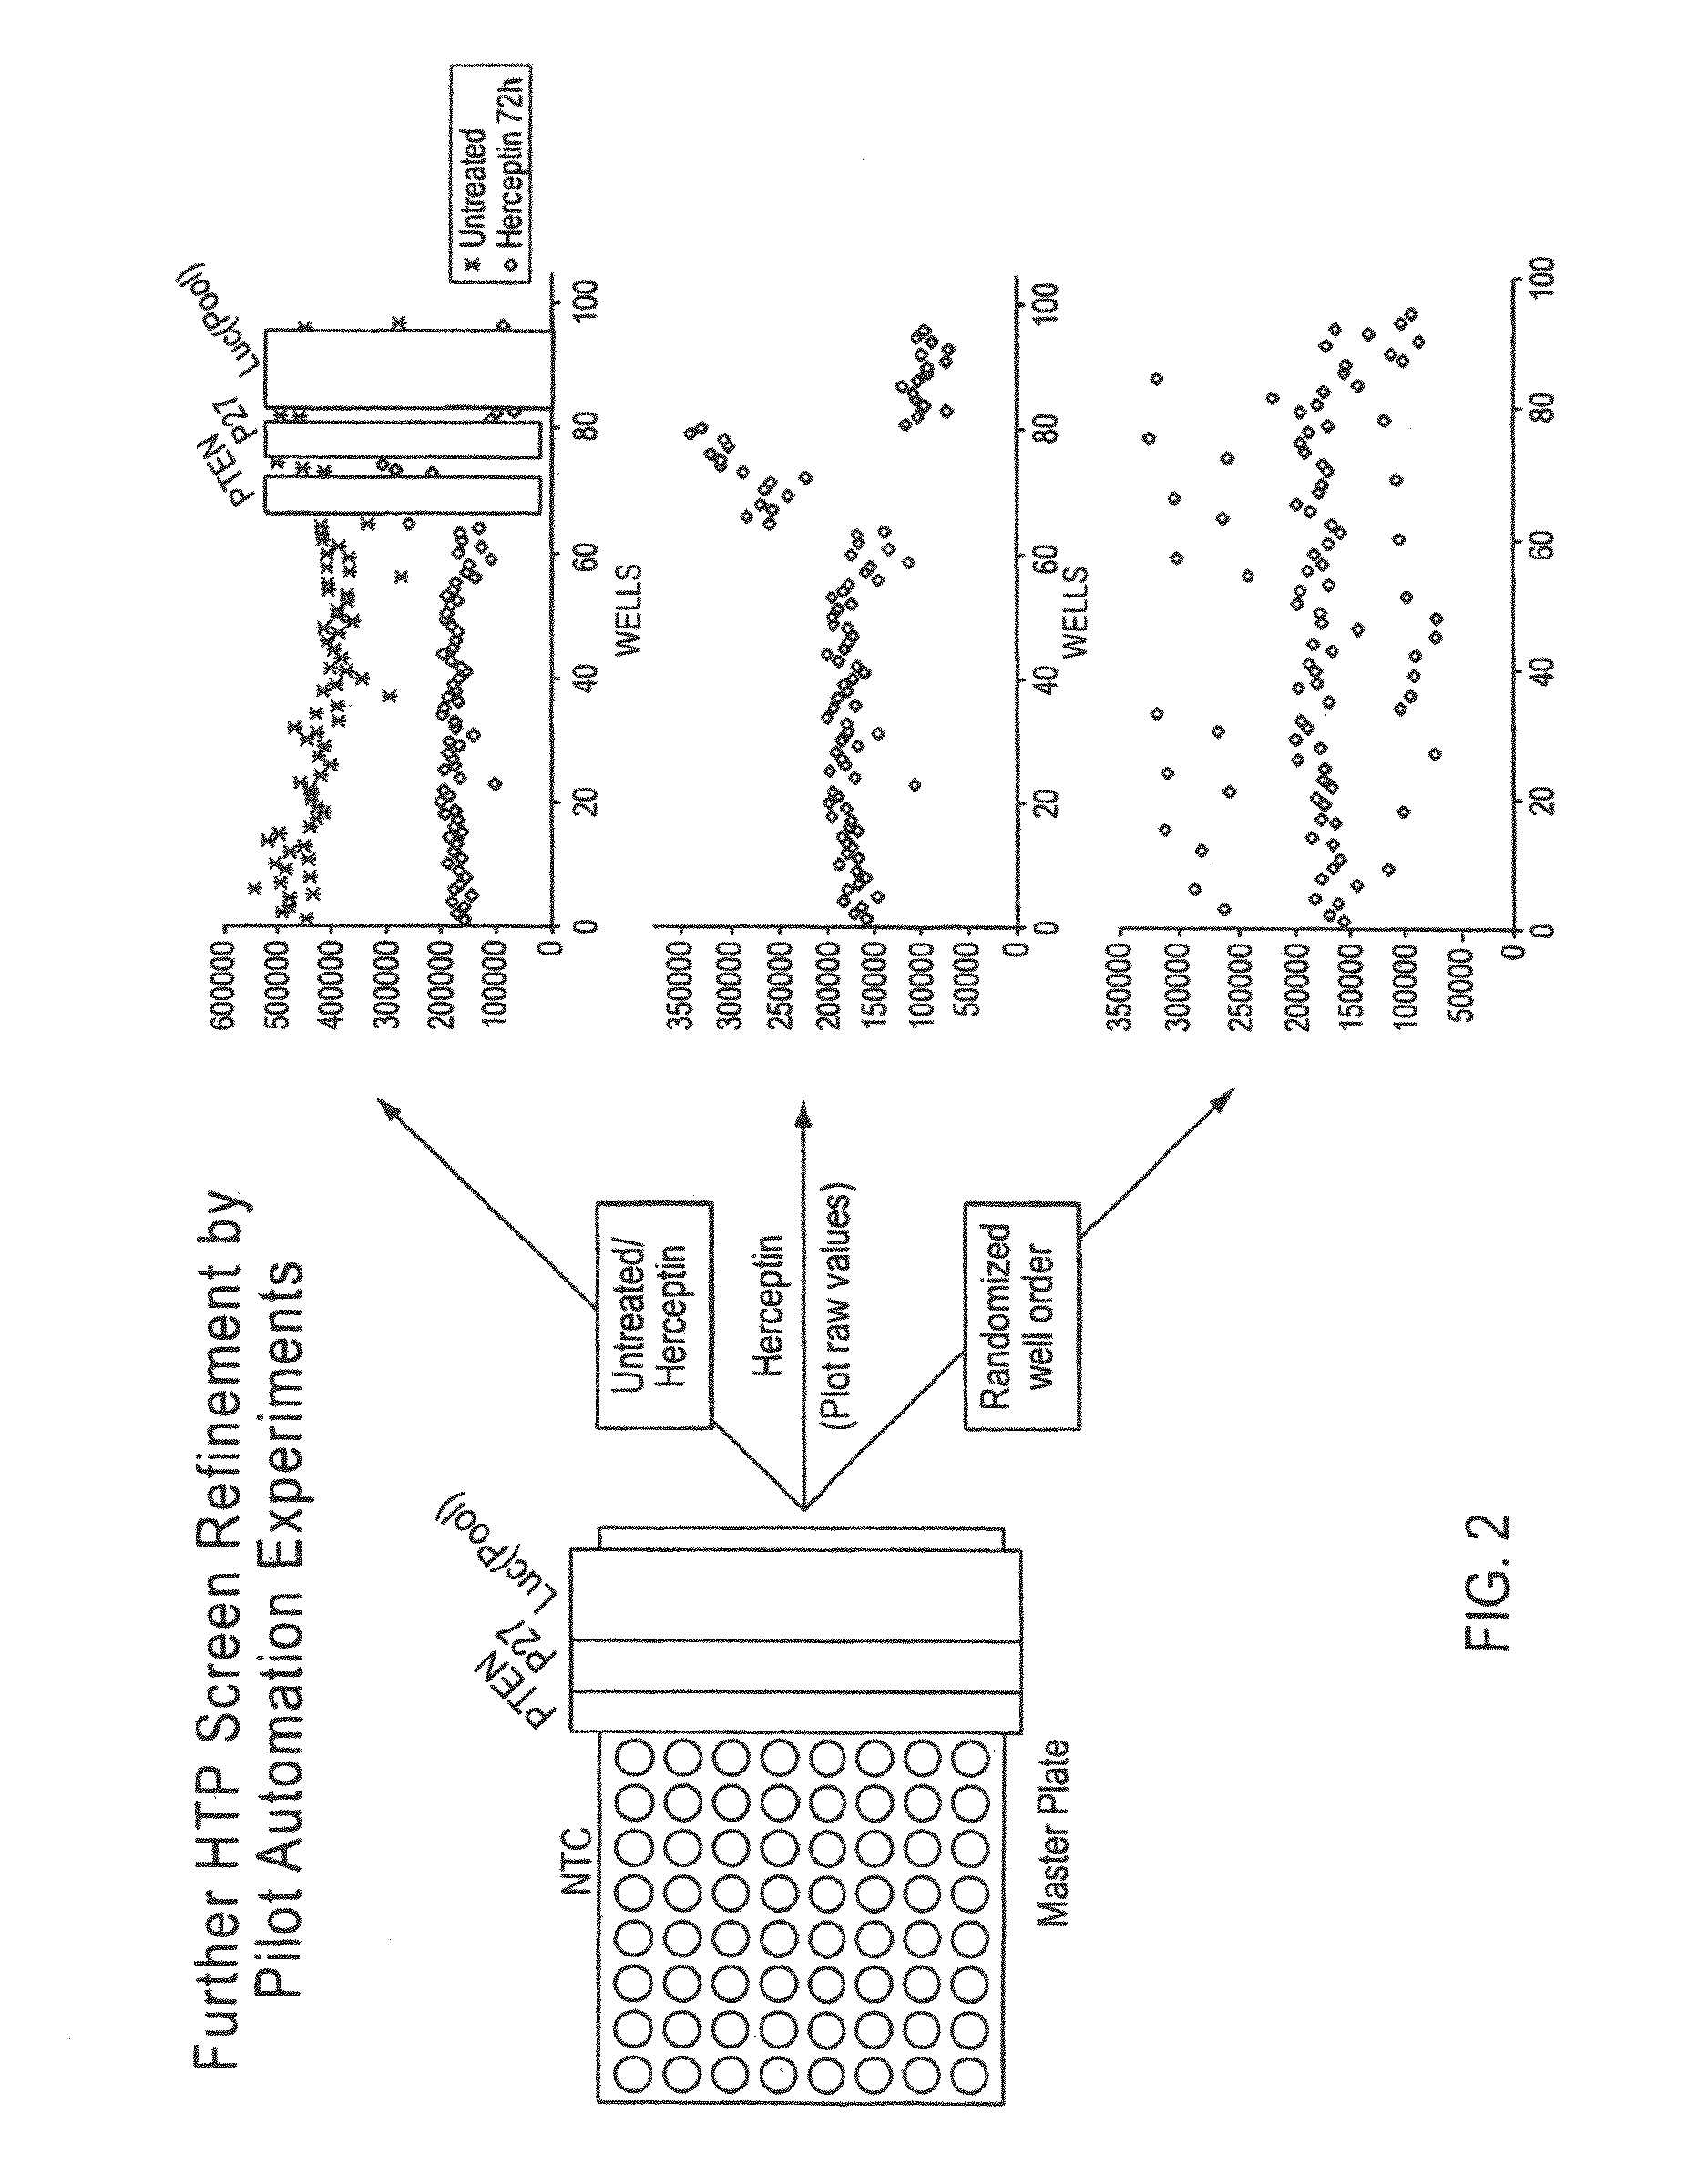 Gene expression markers of tumor resistance to HER2 inhibitor treatment